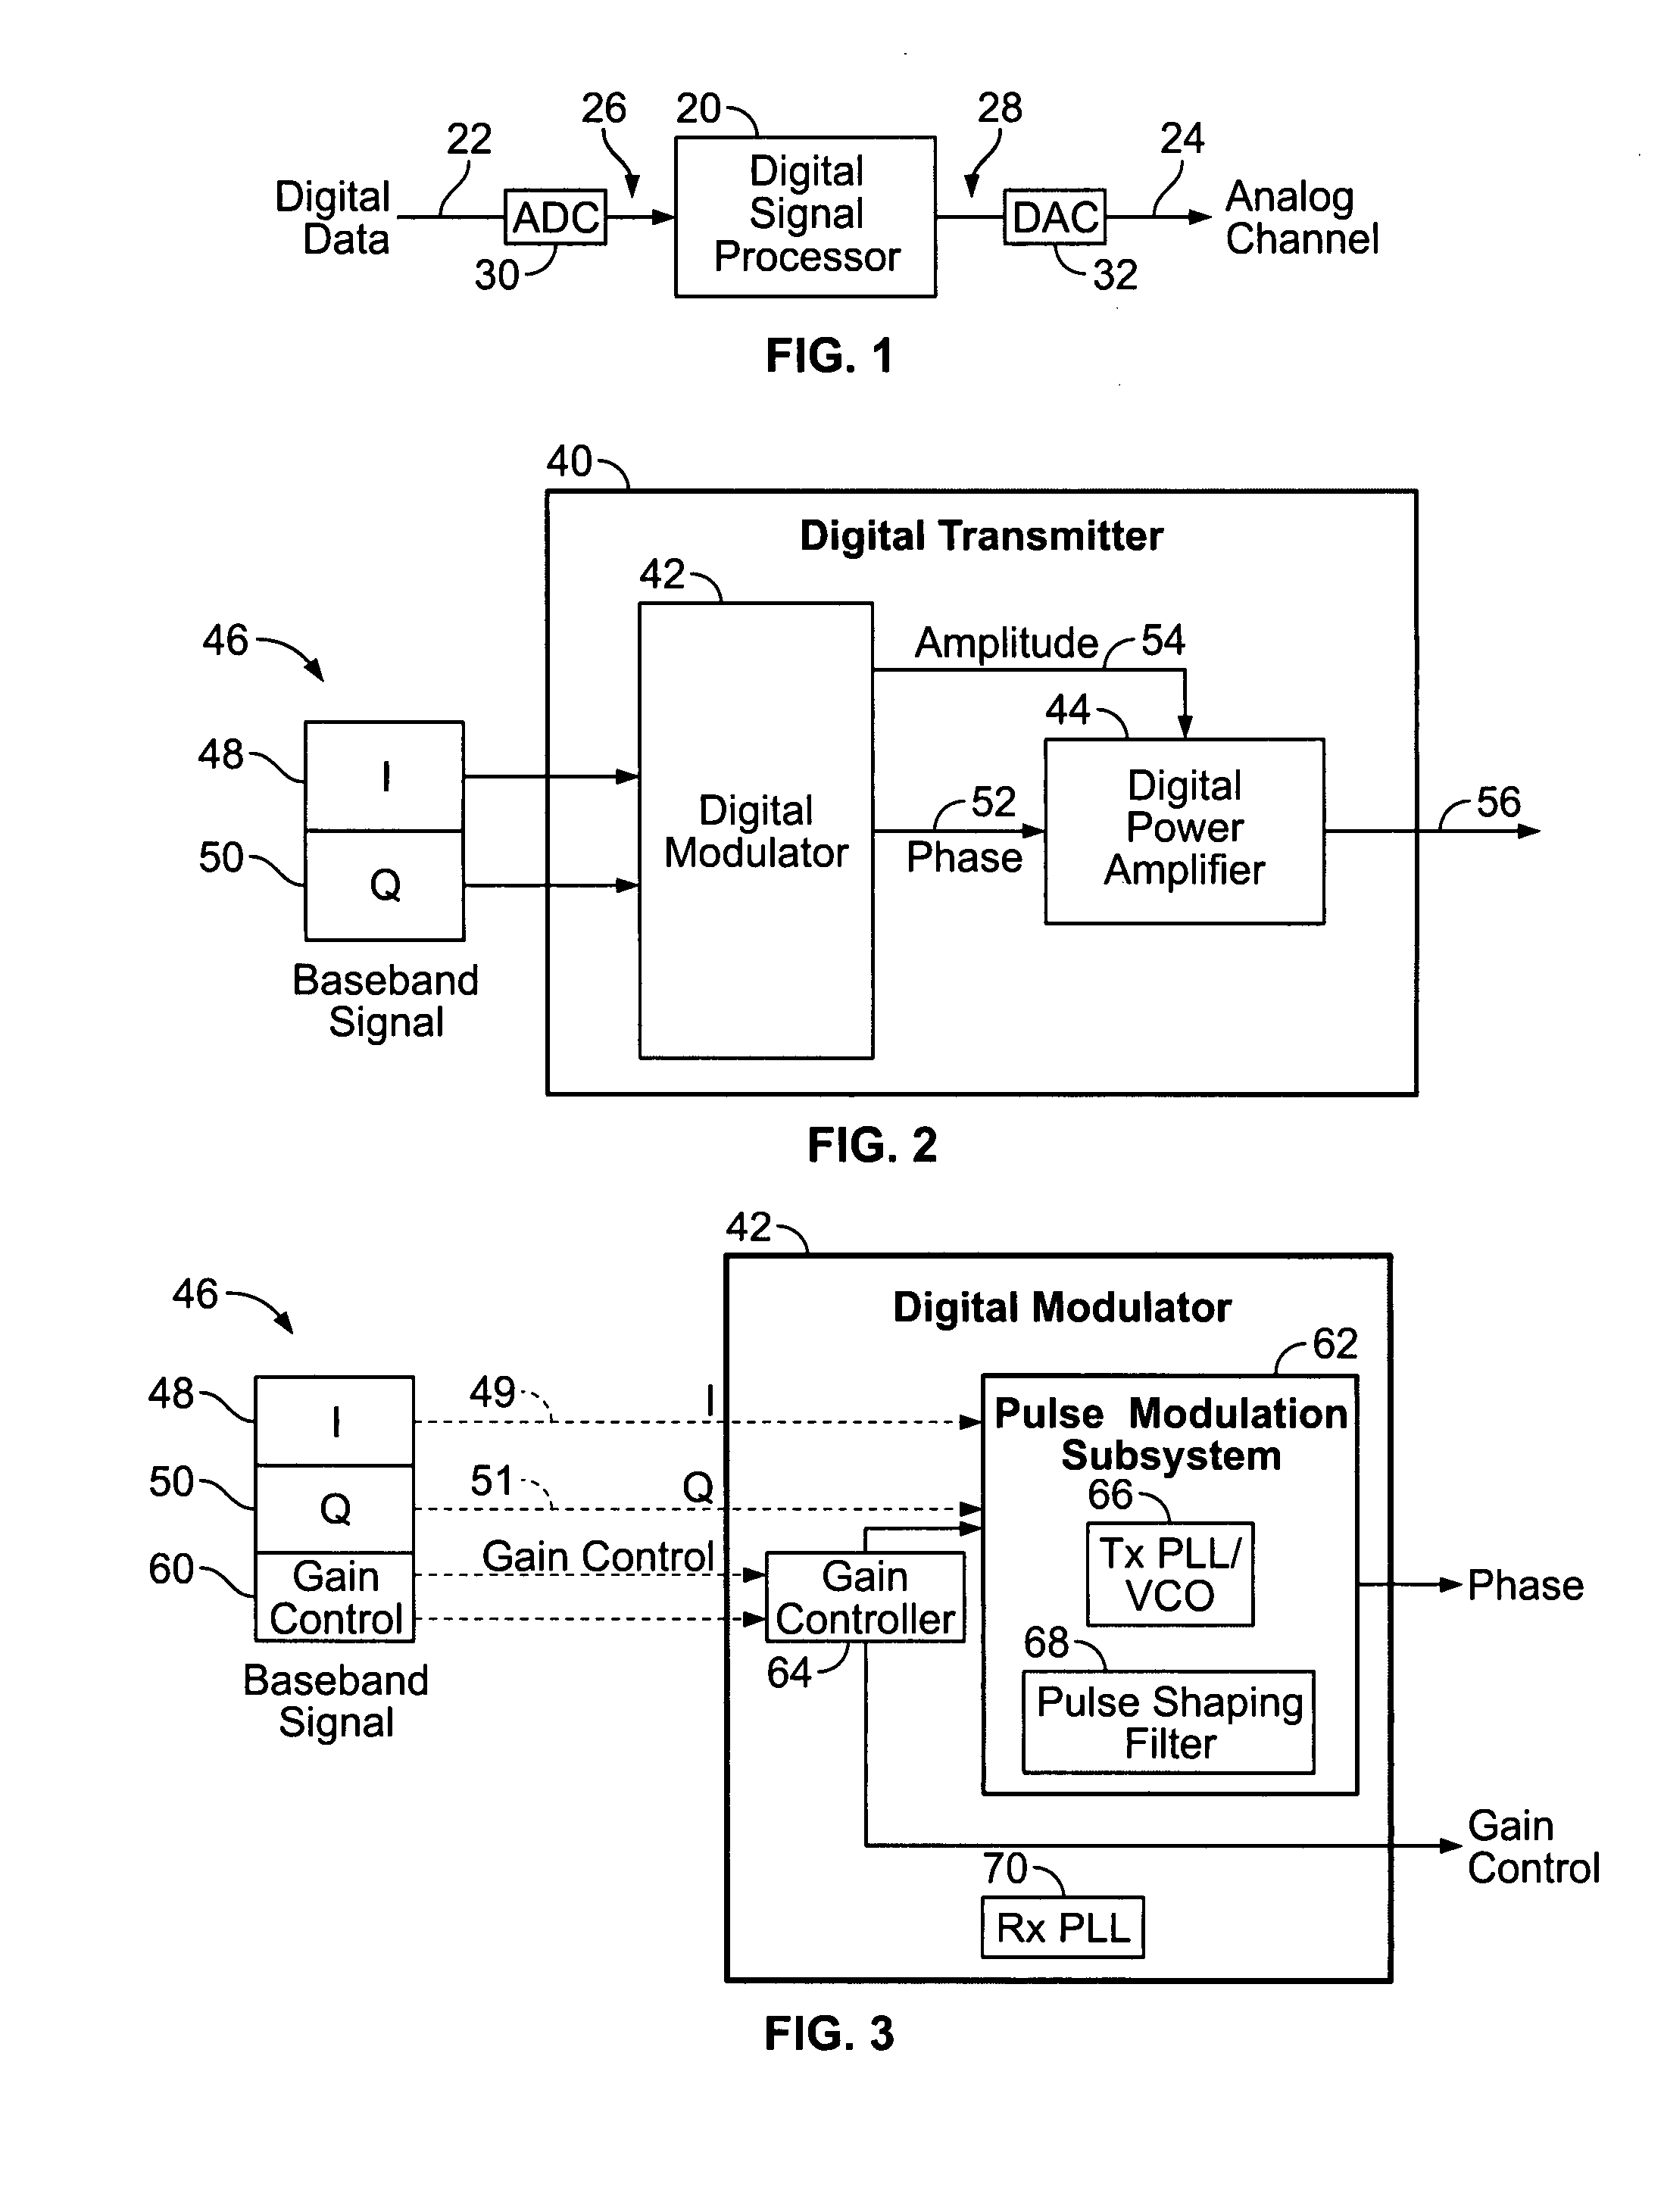 Method and architecture for digital pulse shaping and rate conversion